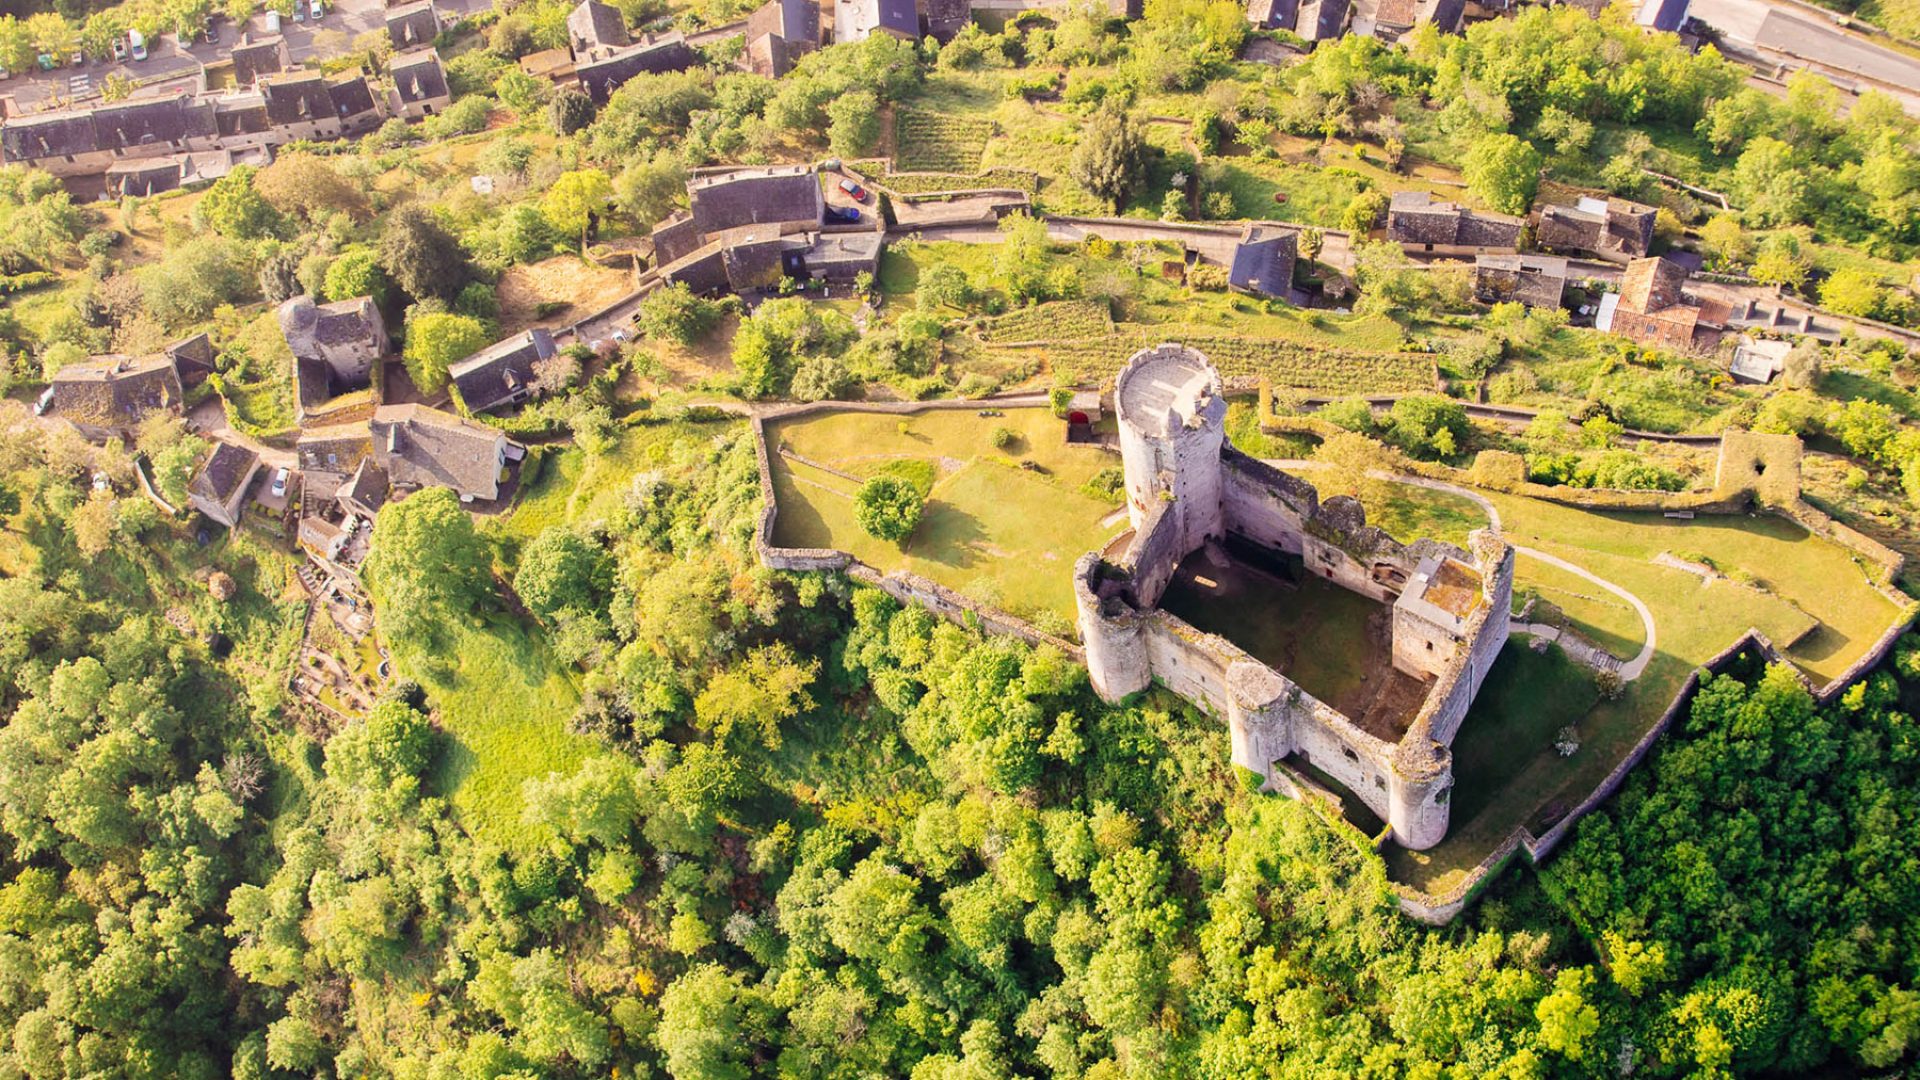 The fortress of Najac seen from the sky